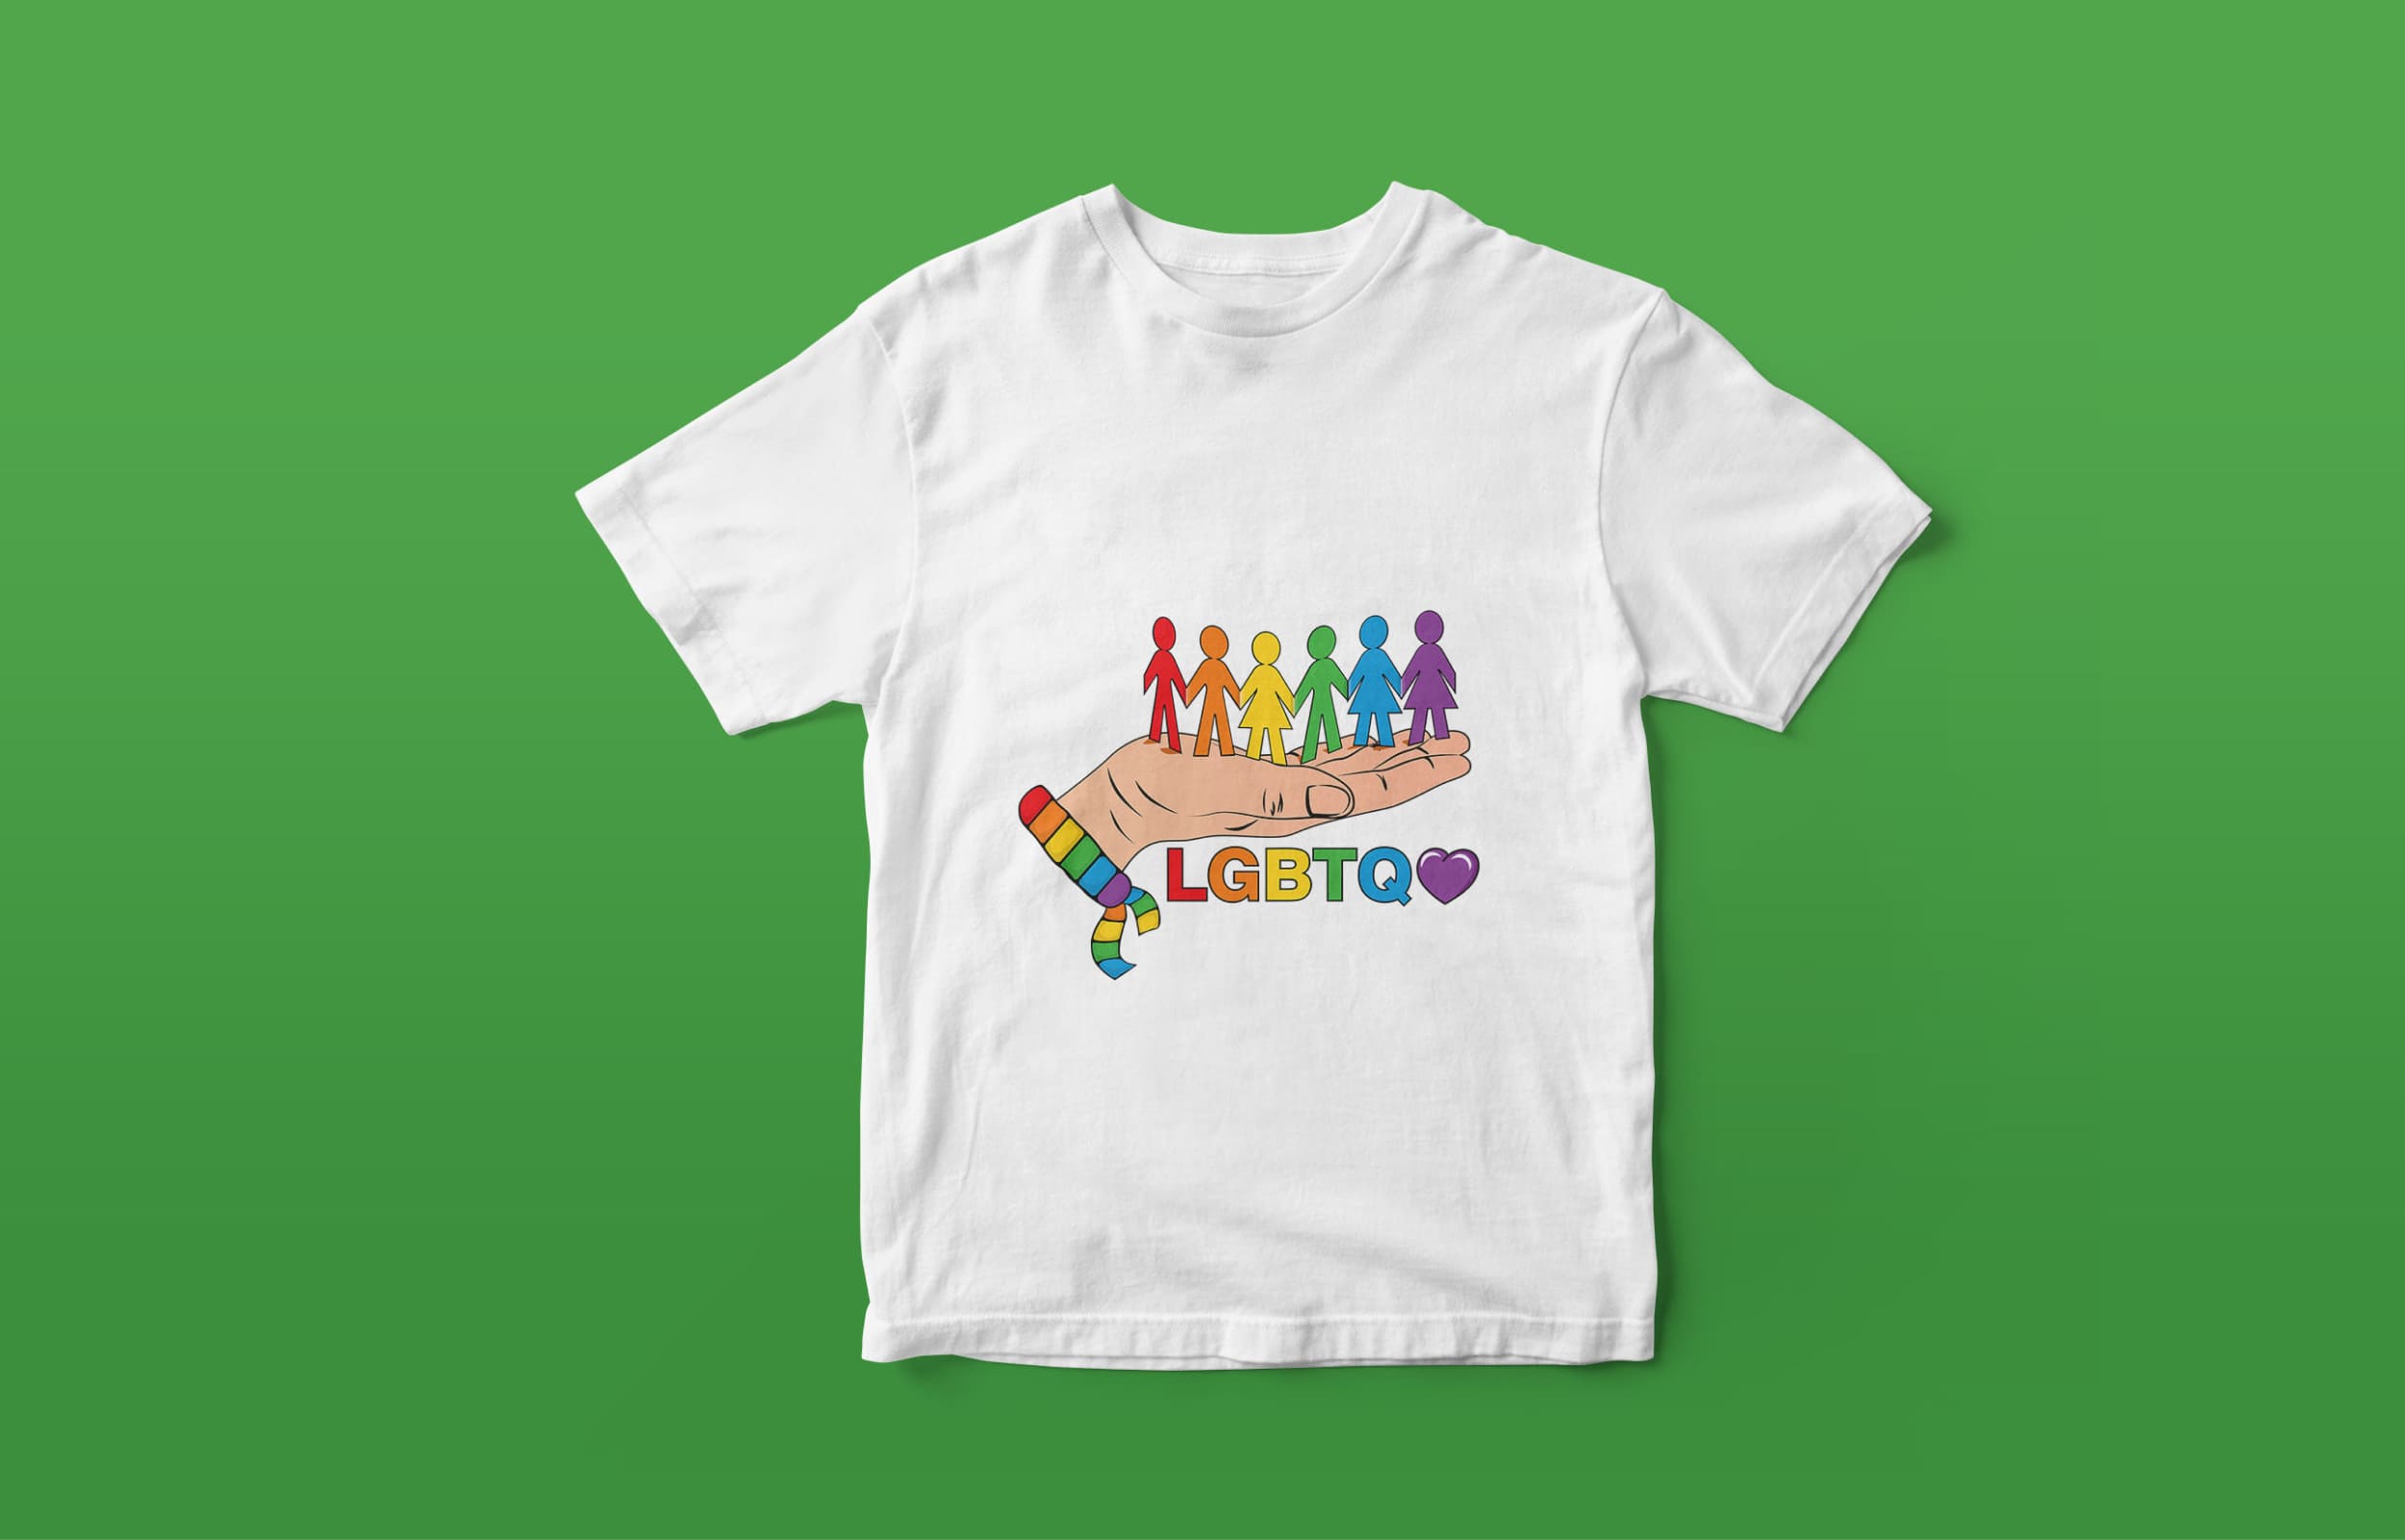 A white t-shirt with a hand holding people in LGBT colors, the lettering "LGBTQ" and a heart in LGBT colors on a green background.